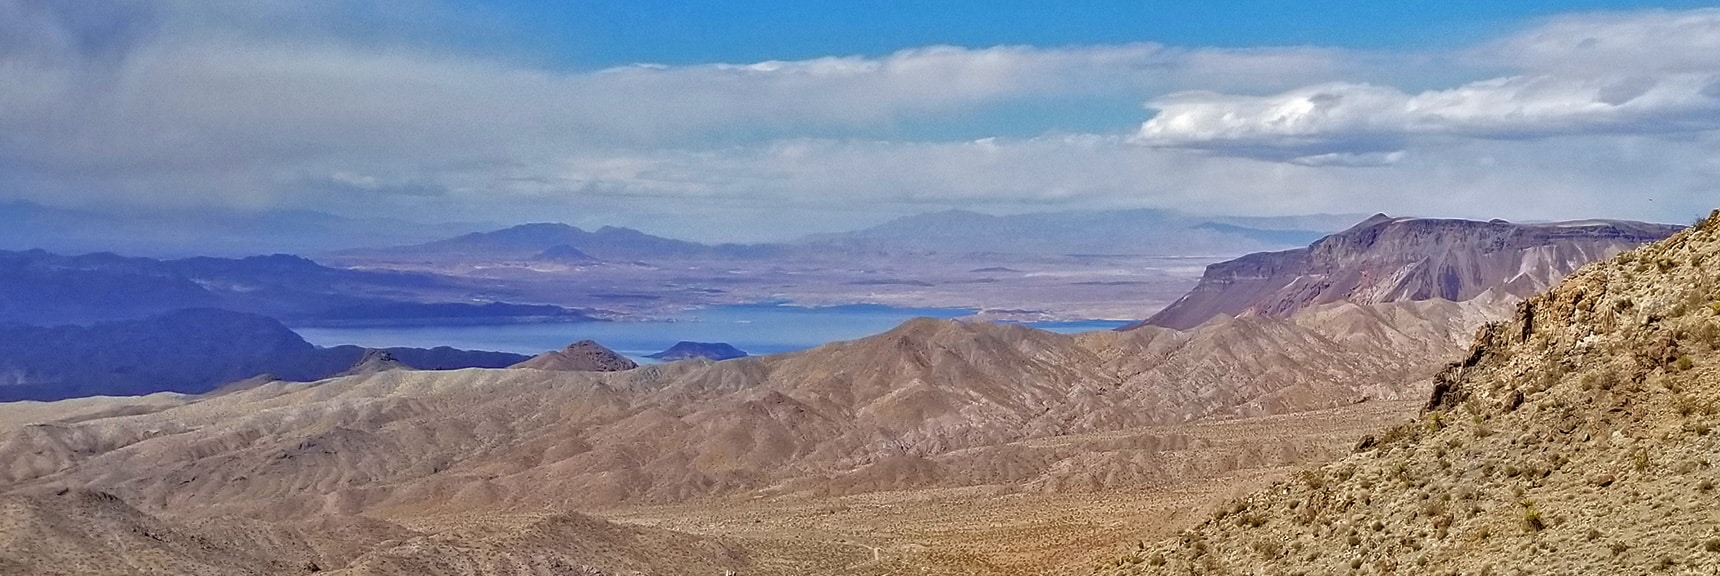 Higher View of Lake Mead, Frenchman Mt., Gass Peak, Sheep Range and Fortification Hill | Mt Wilson, Black Mountains, Arizona, Lake Mead National Recreation Area